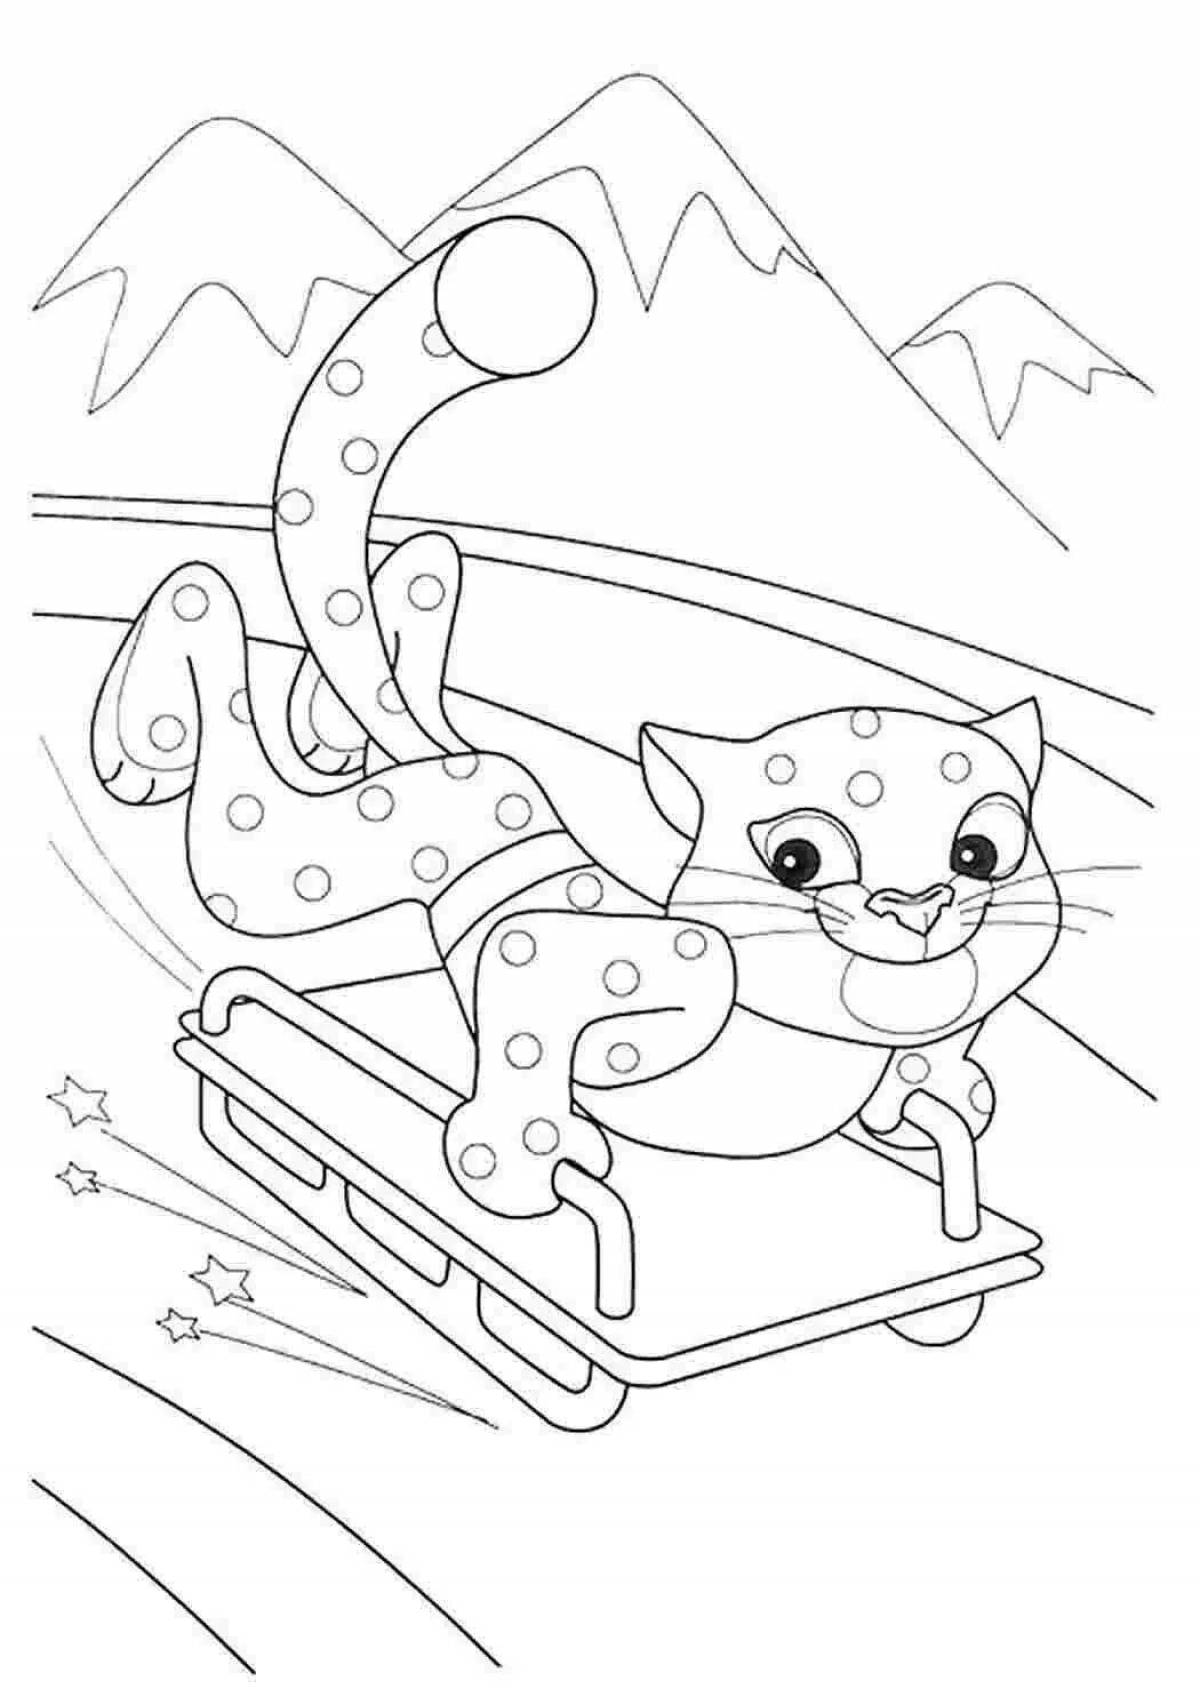 Tempting olympic games coloring pages for kids